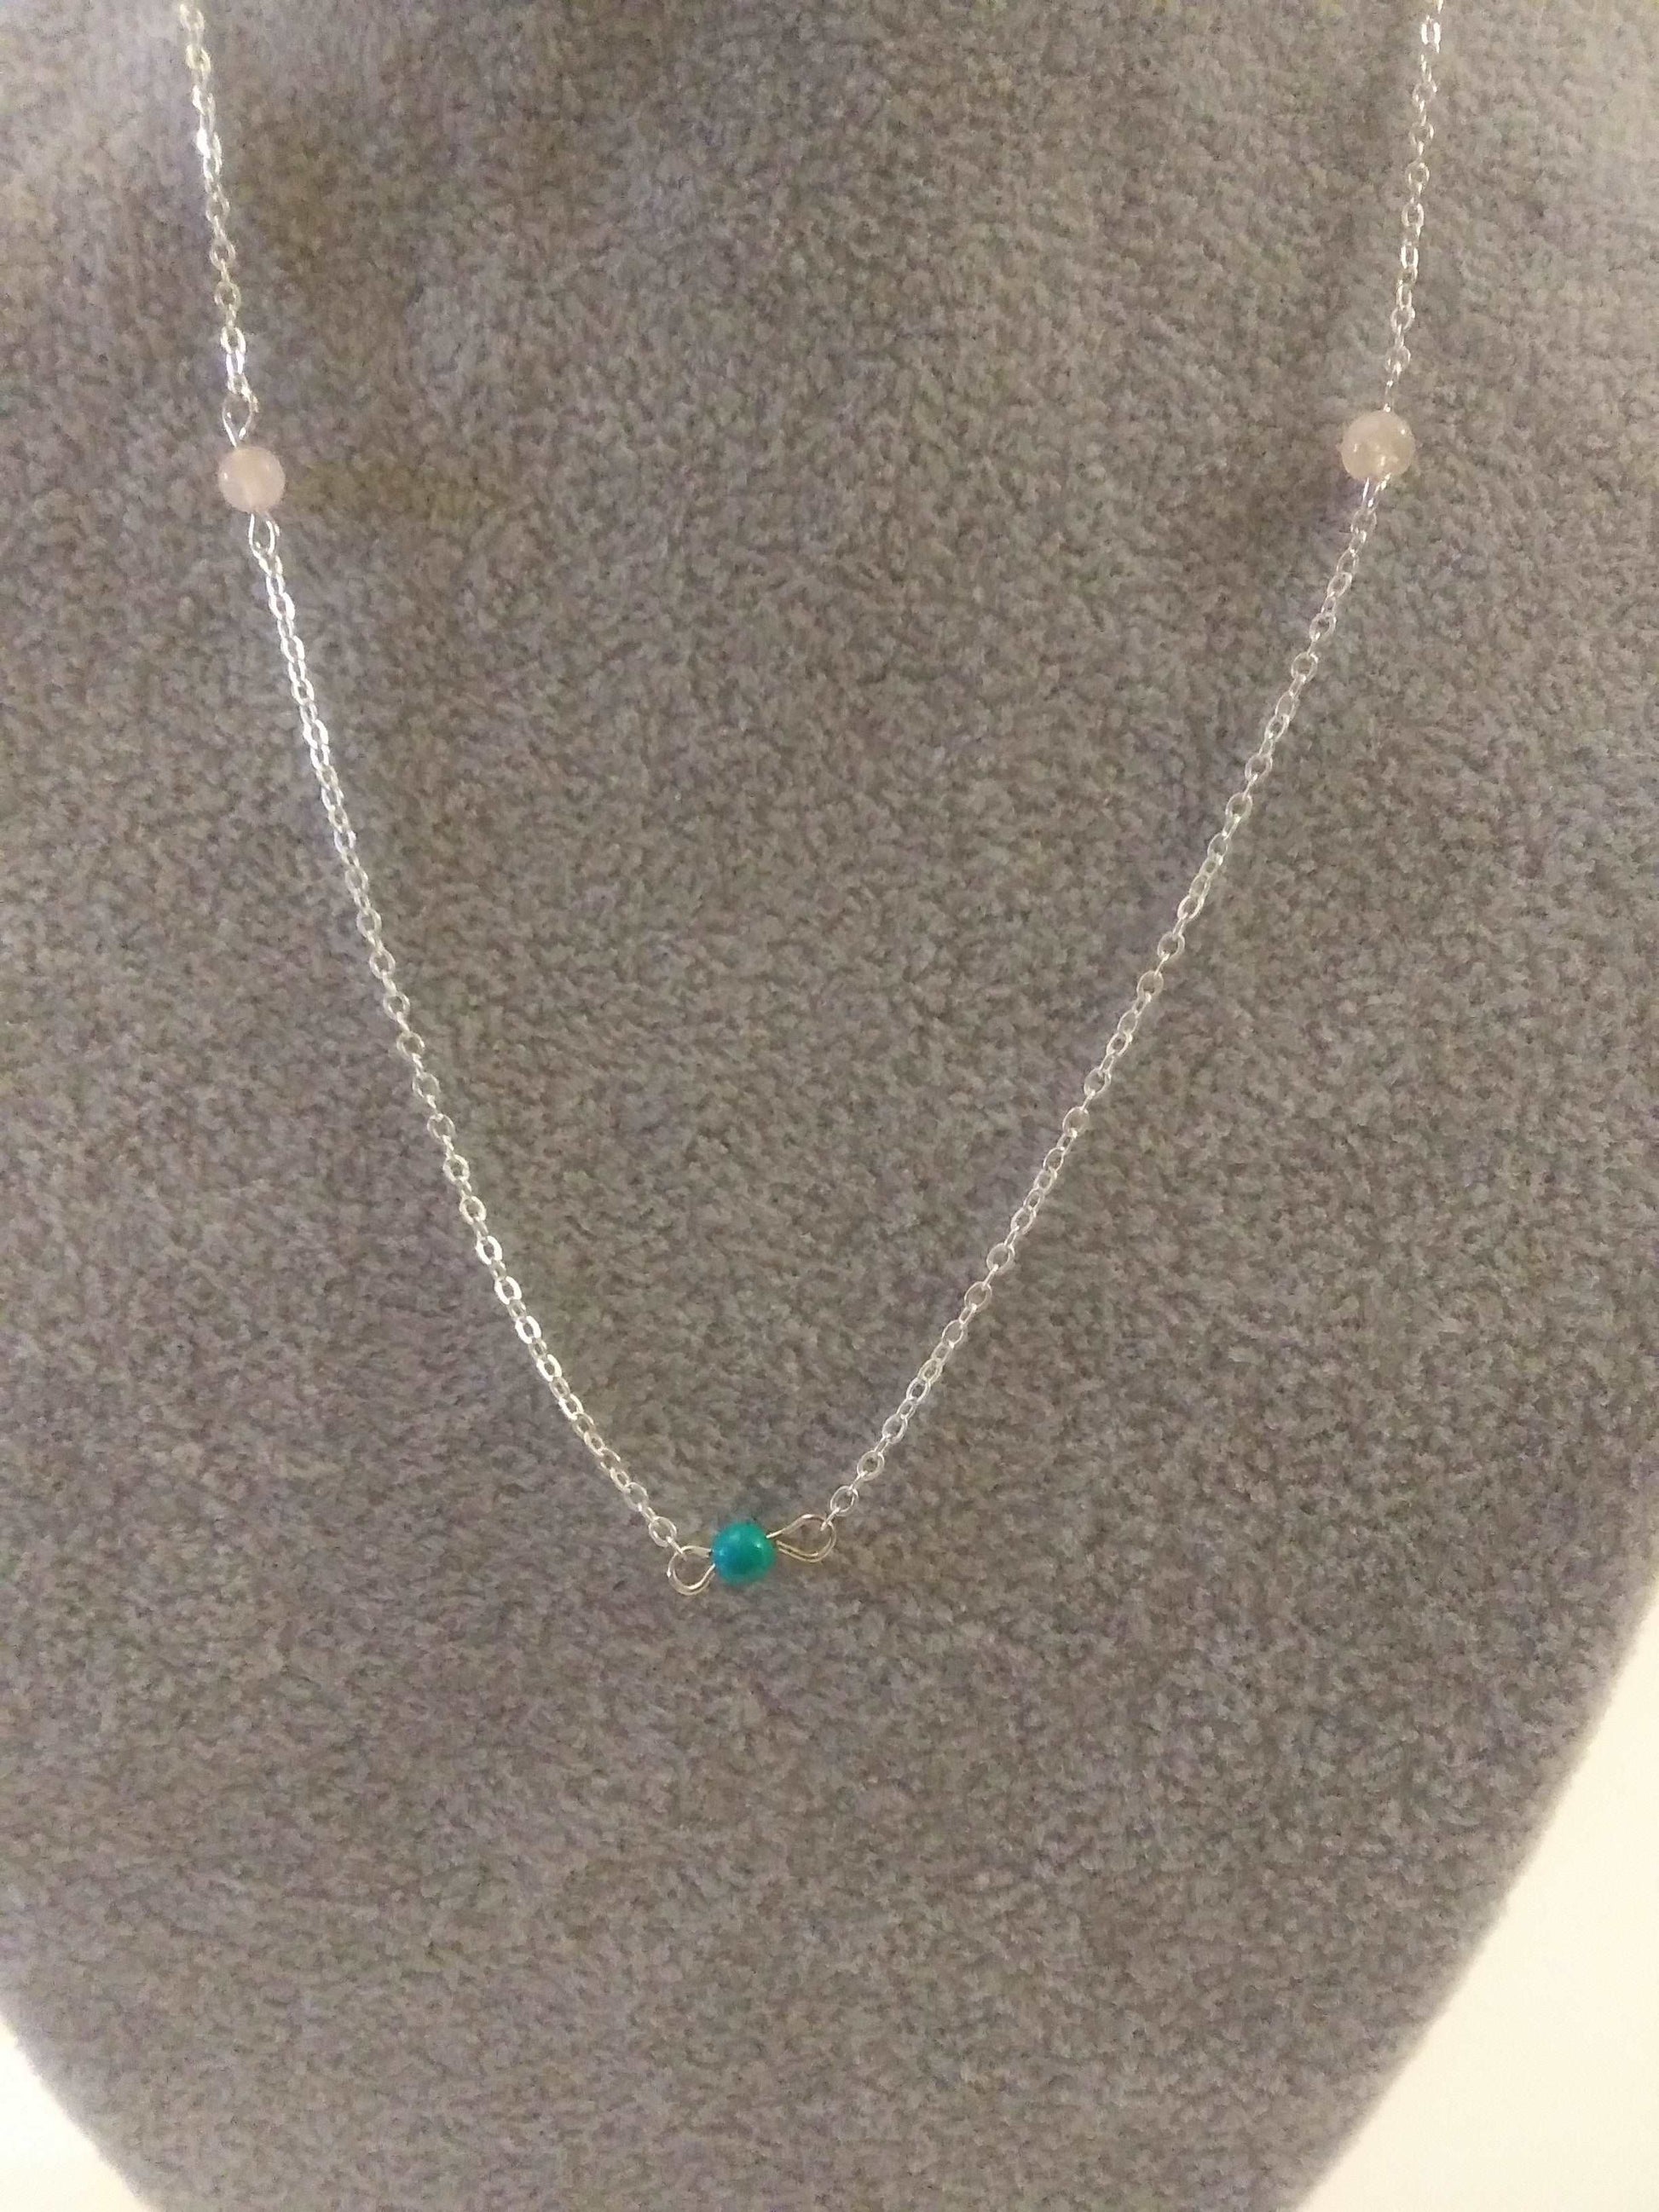 4 mm gemstone rose and turquoise  925 20 inch necklace - Providence silver gold jewelry usa